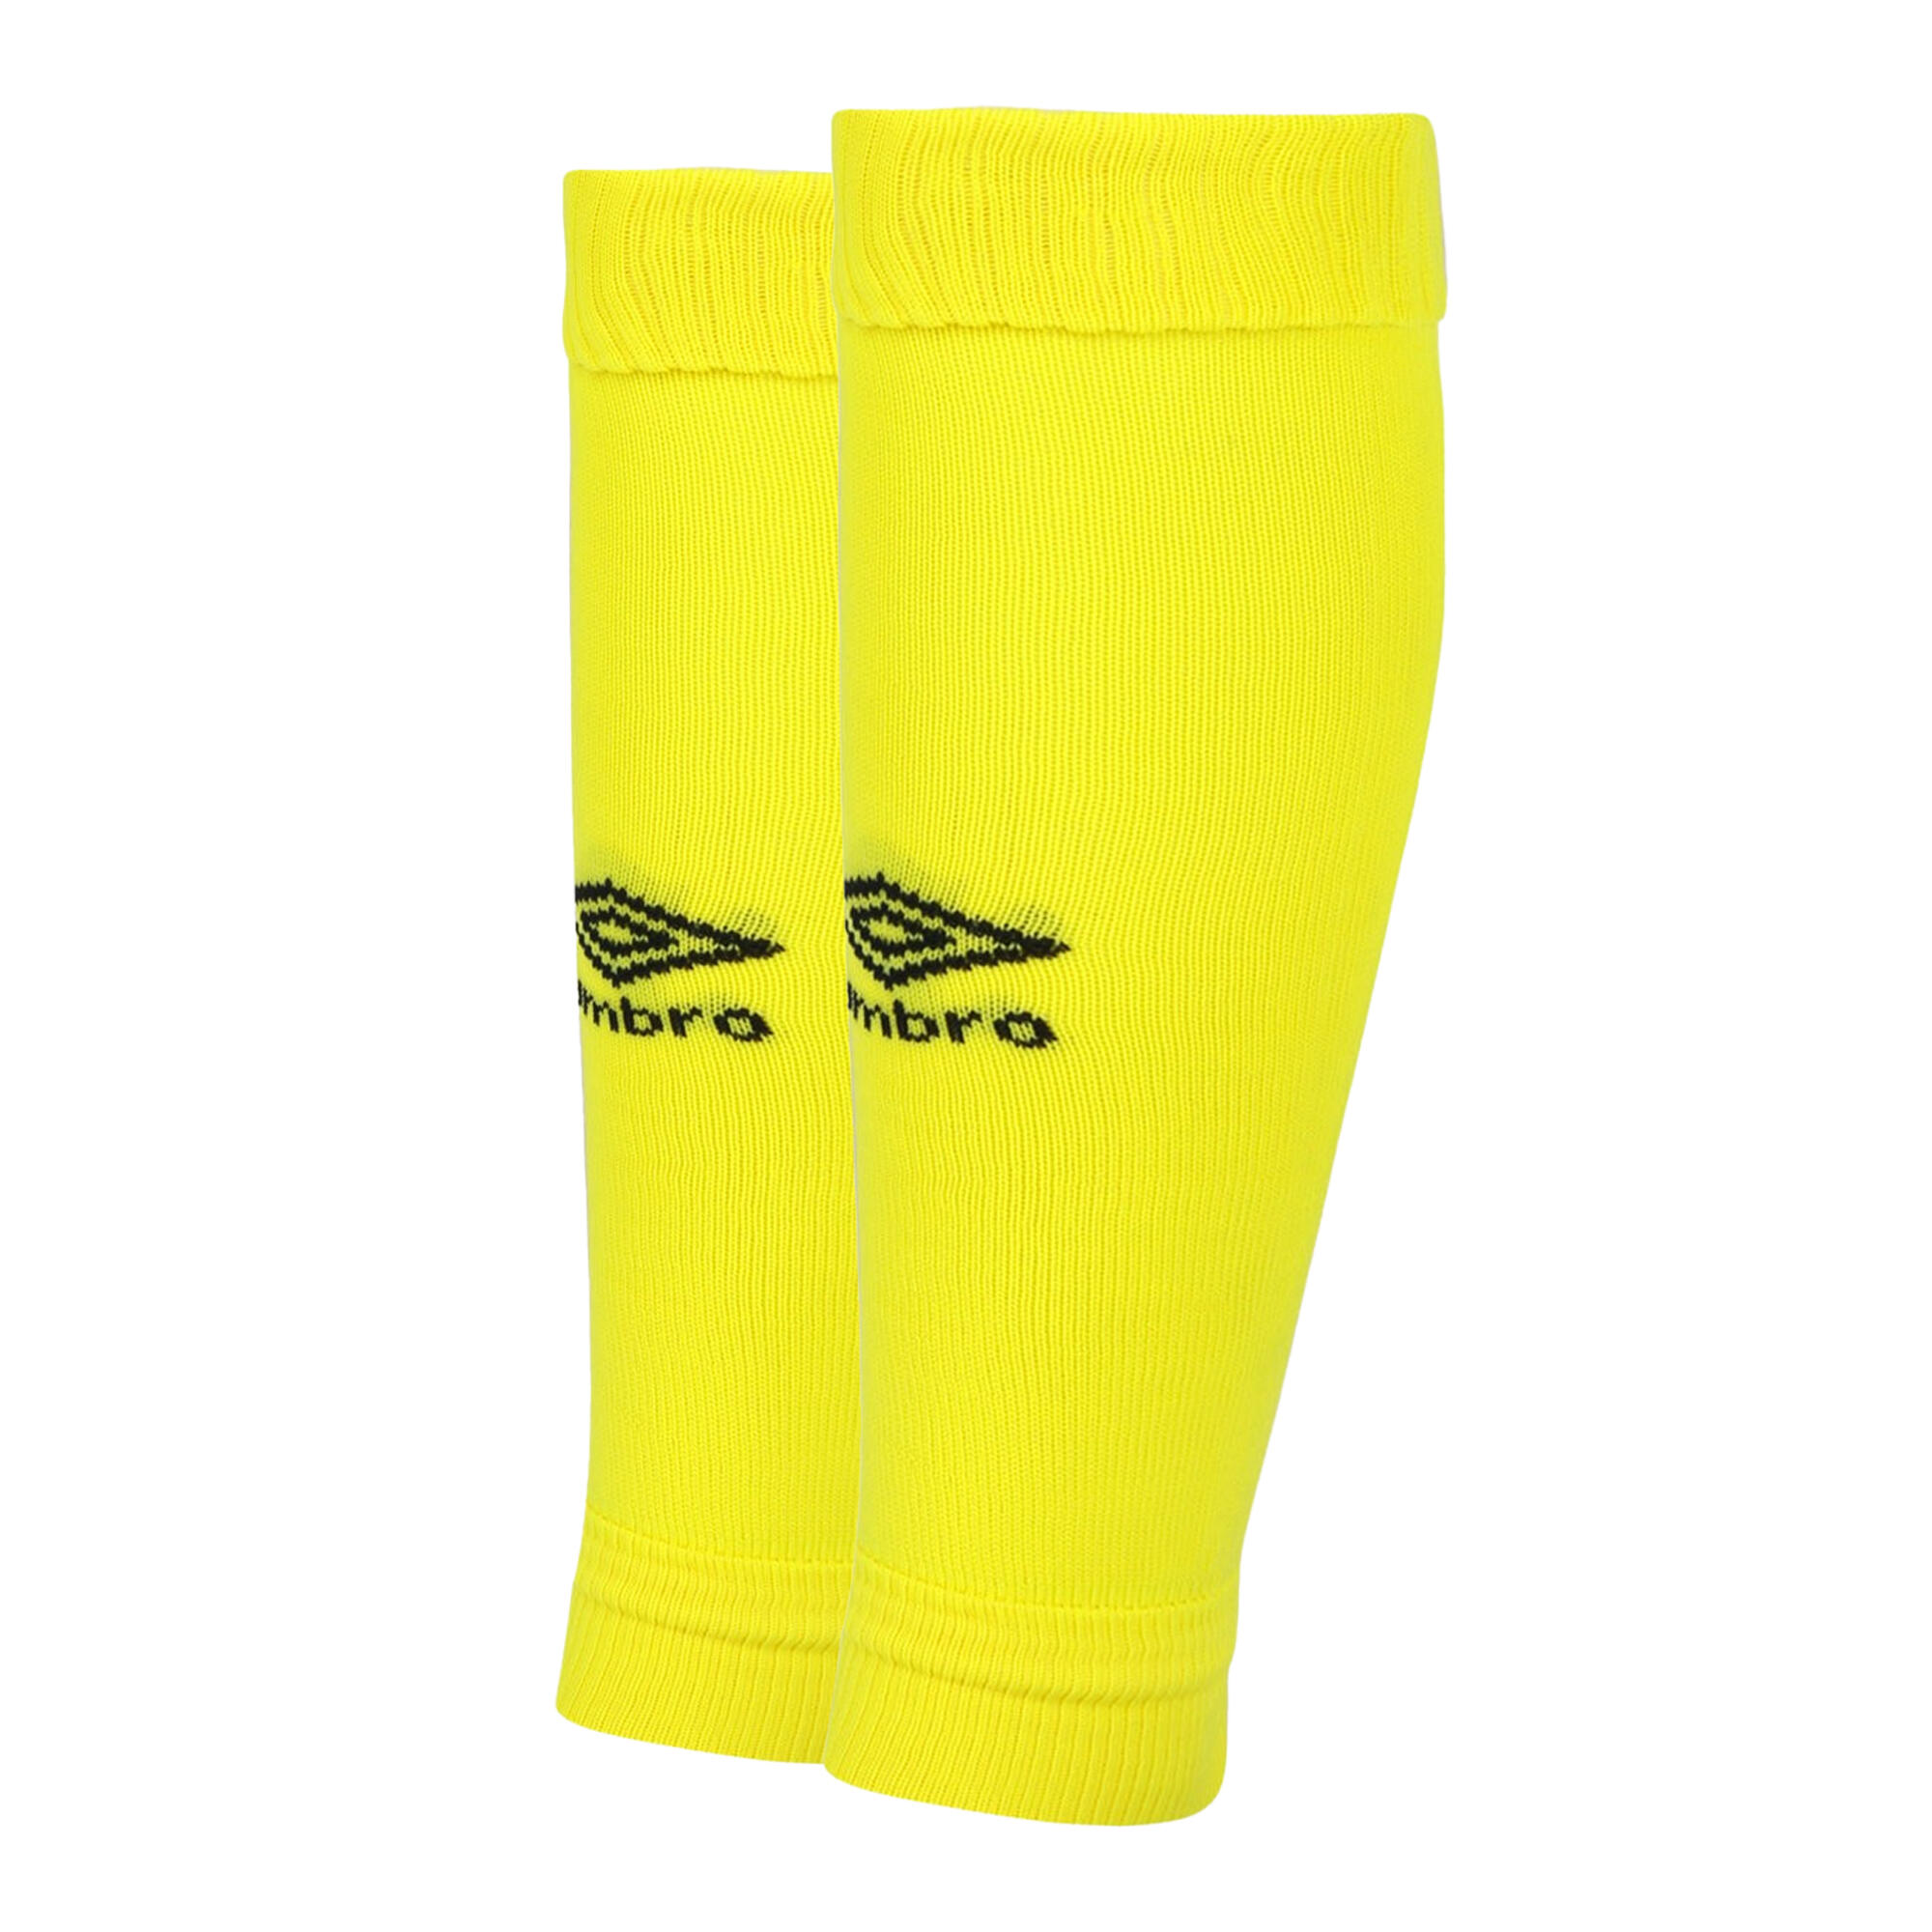 Mens Leg Sleeves (Safety Yellow/Carbon) 2/3